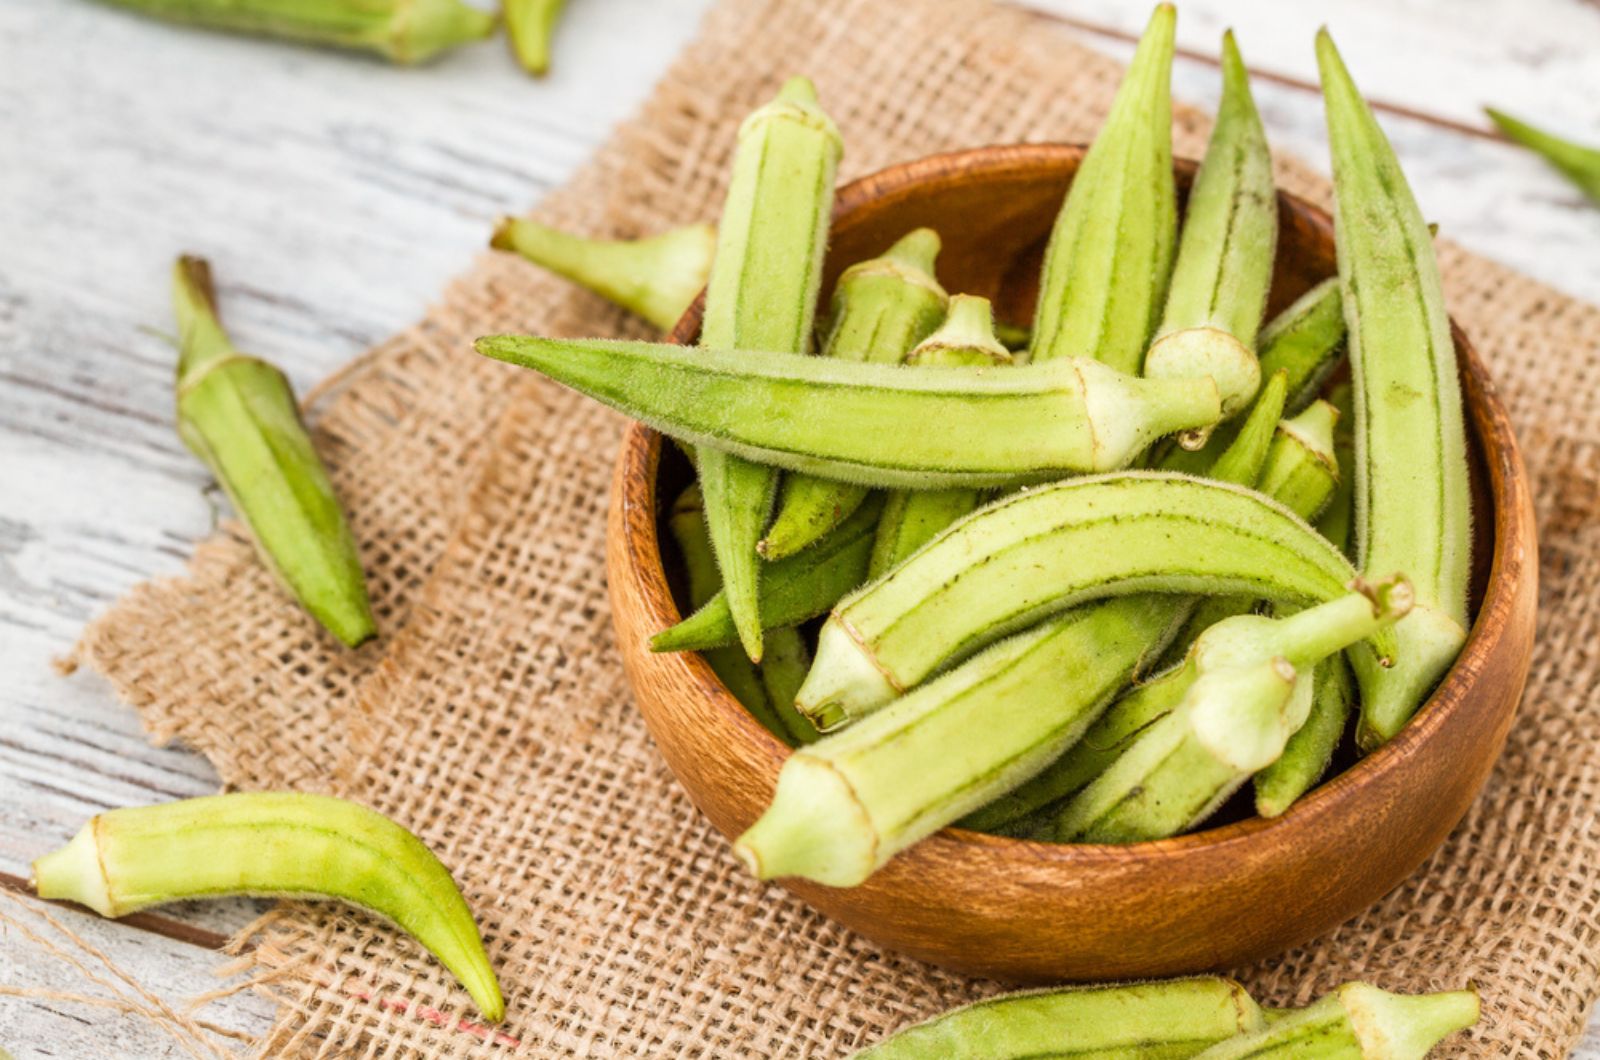 Growing Tasty Okra Has Never Been Easier With These Tips And Secret Formula